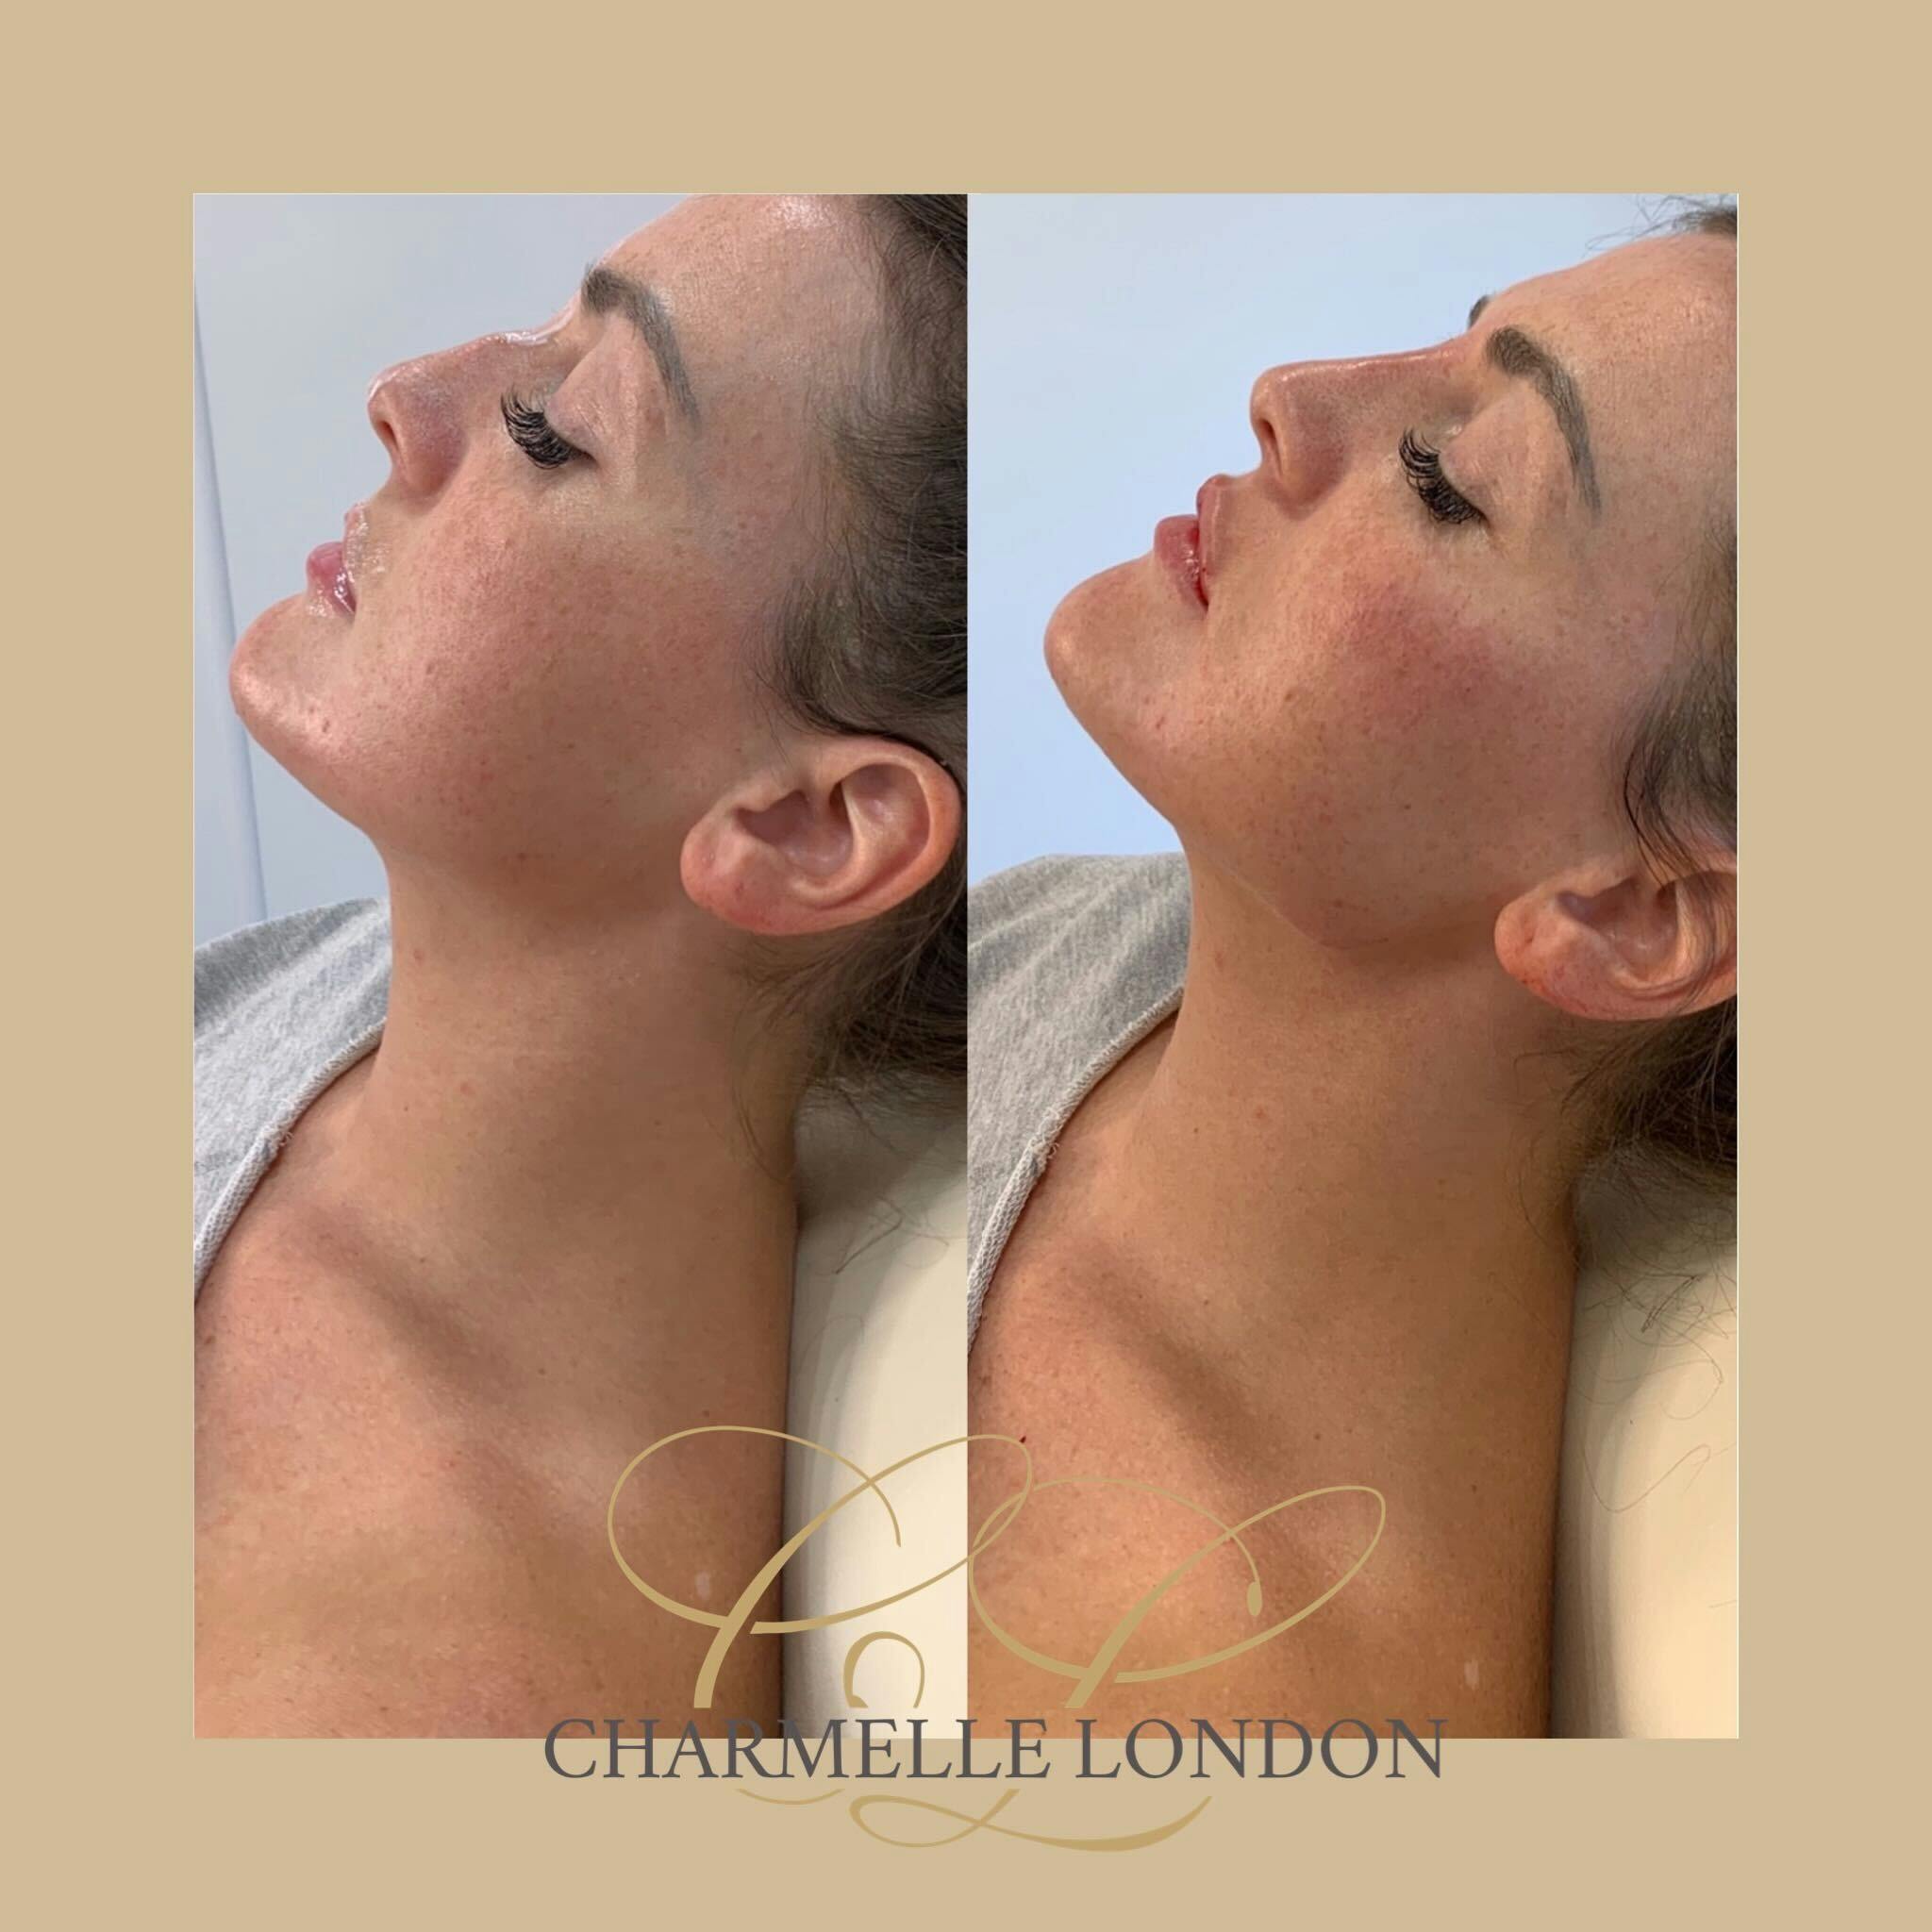 Dermal fillers work by re-shaping the jawline to achieve better shape, proportions and definition to rejuvenate your appearence to be more youthful